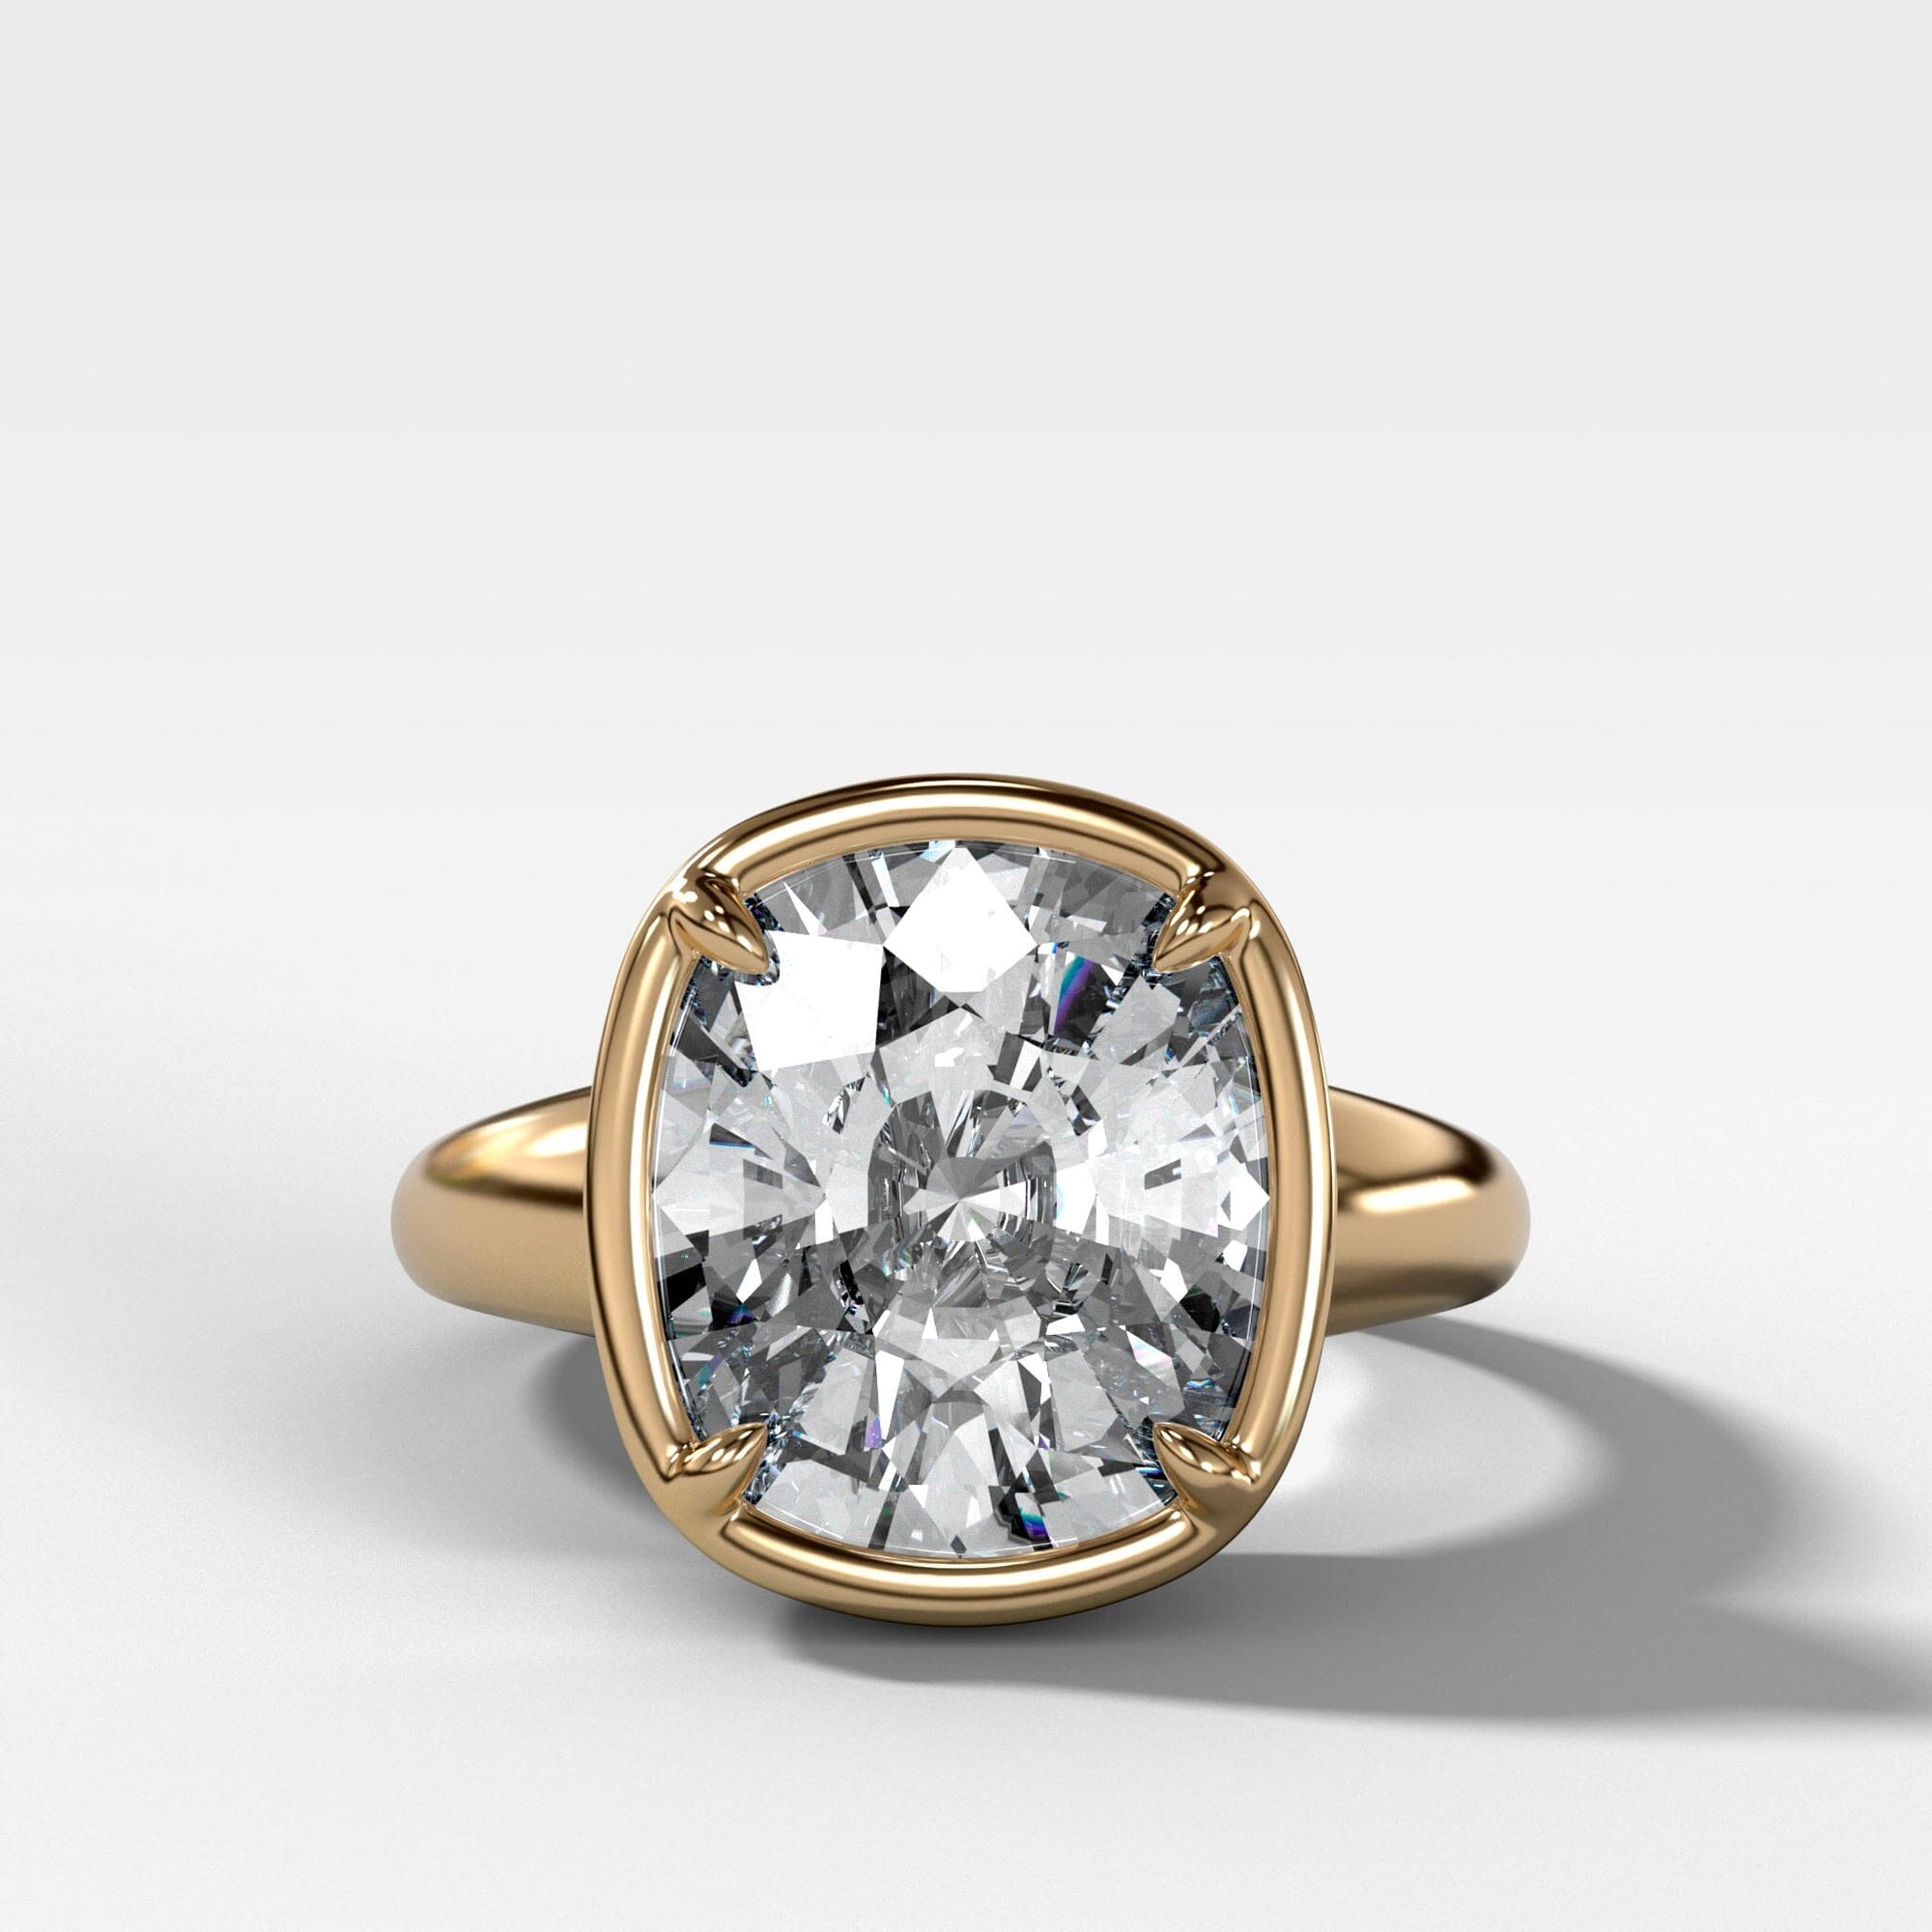 Club Ring Solitaire With an Elongated Cushion Cut Engagement Good Stone Inc 